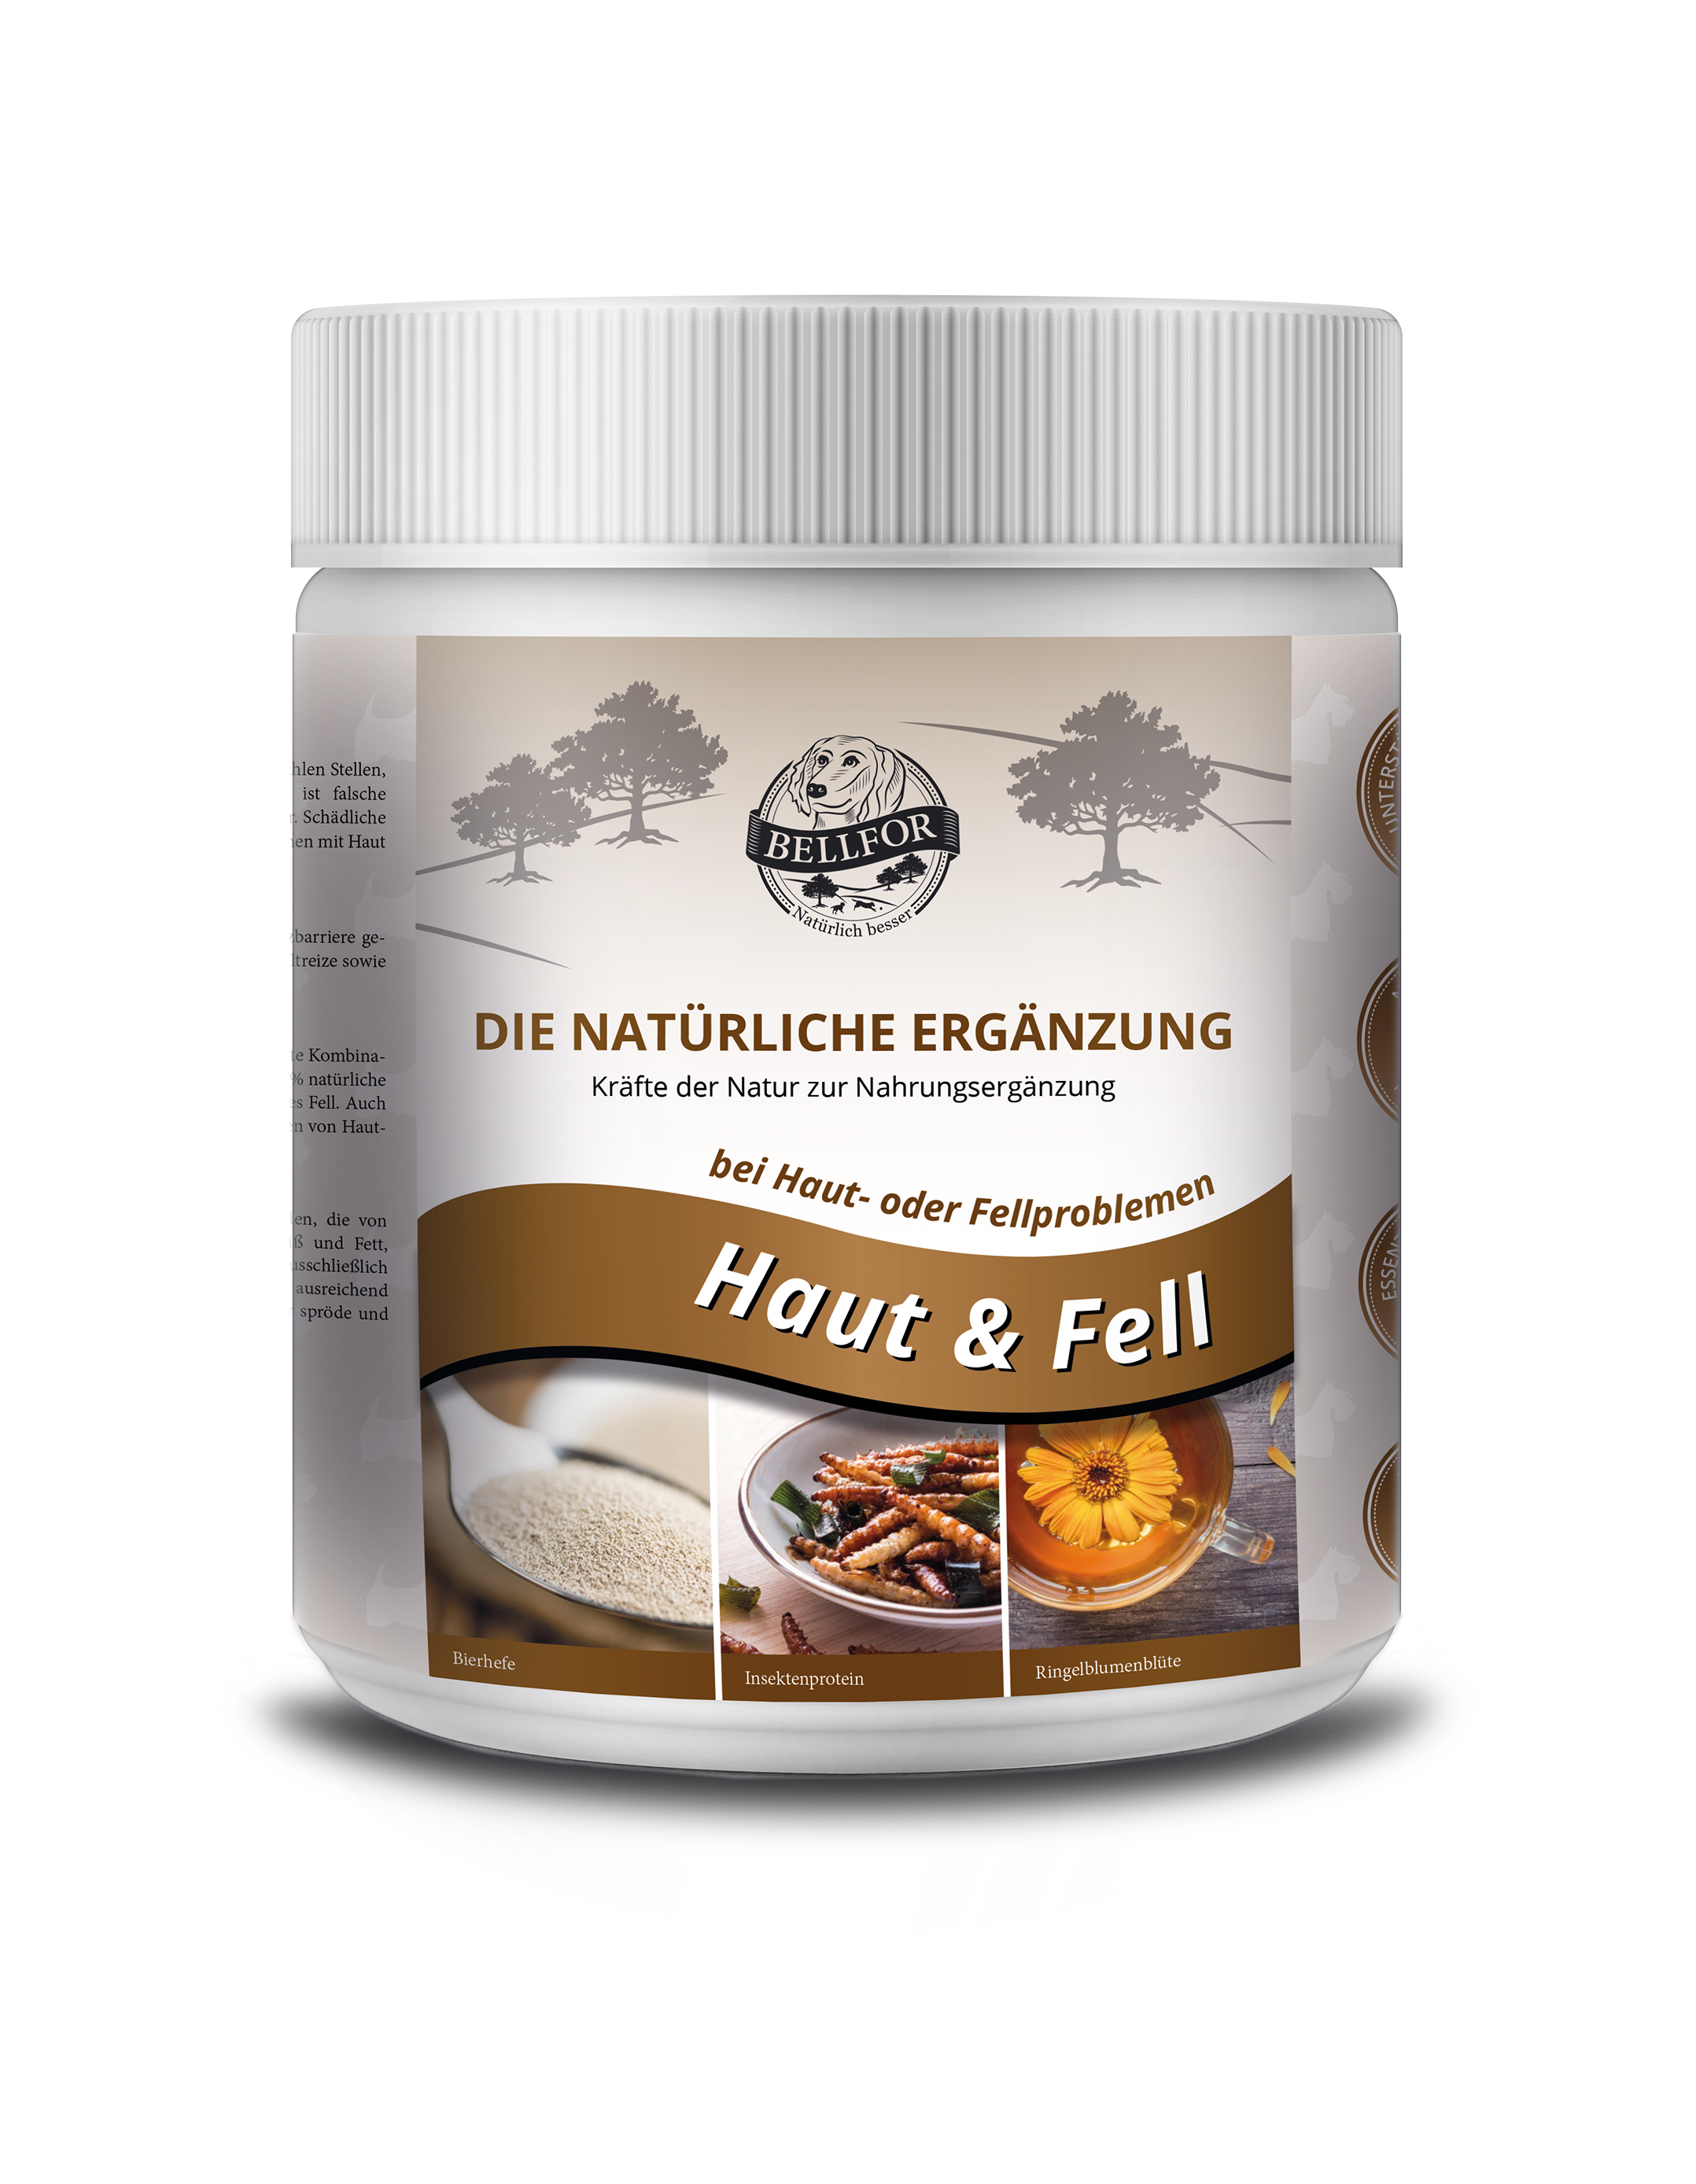 Bellfor "Haut & Fell"-Pulver, 250g-Dose